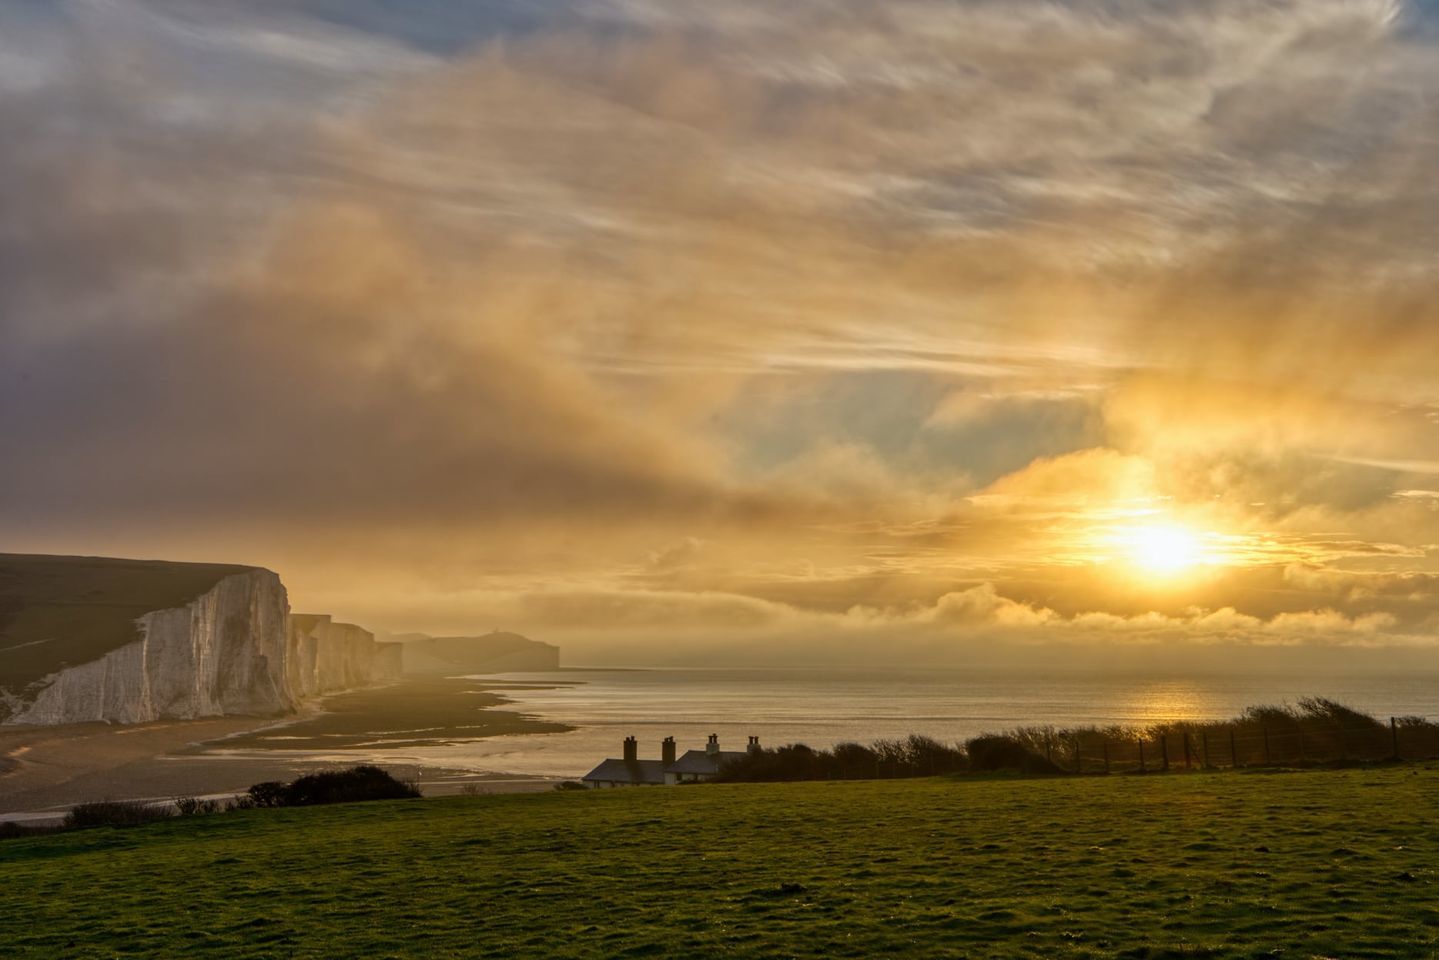 Cuckmere Haven brilliantly captured by Simon Holland Photography. For a chance to see your photo featured here, join The Argus Camera Club at www.facebook.com/groups/cameraclubargus